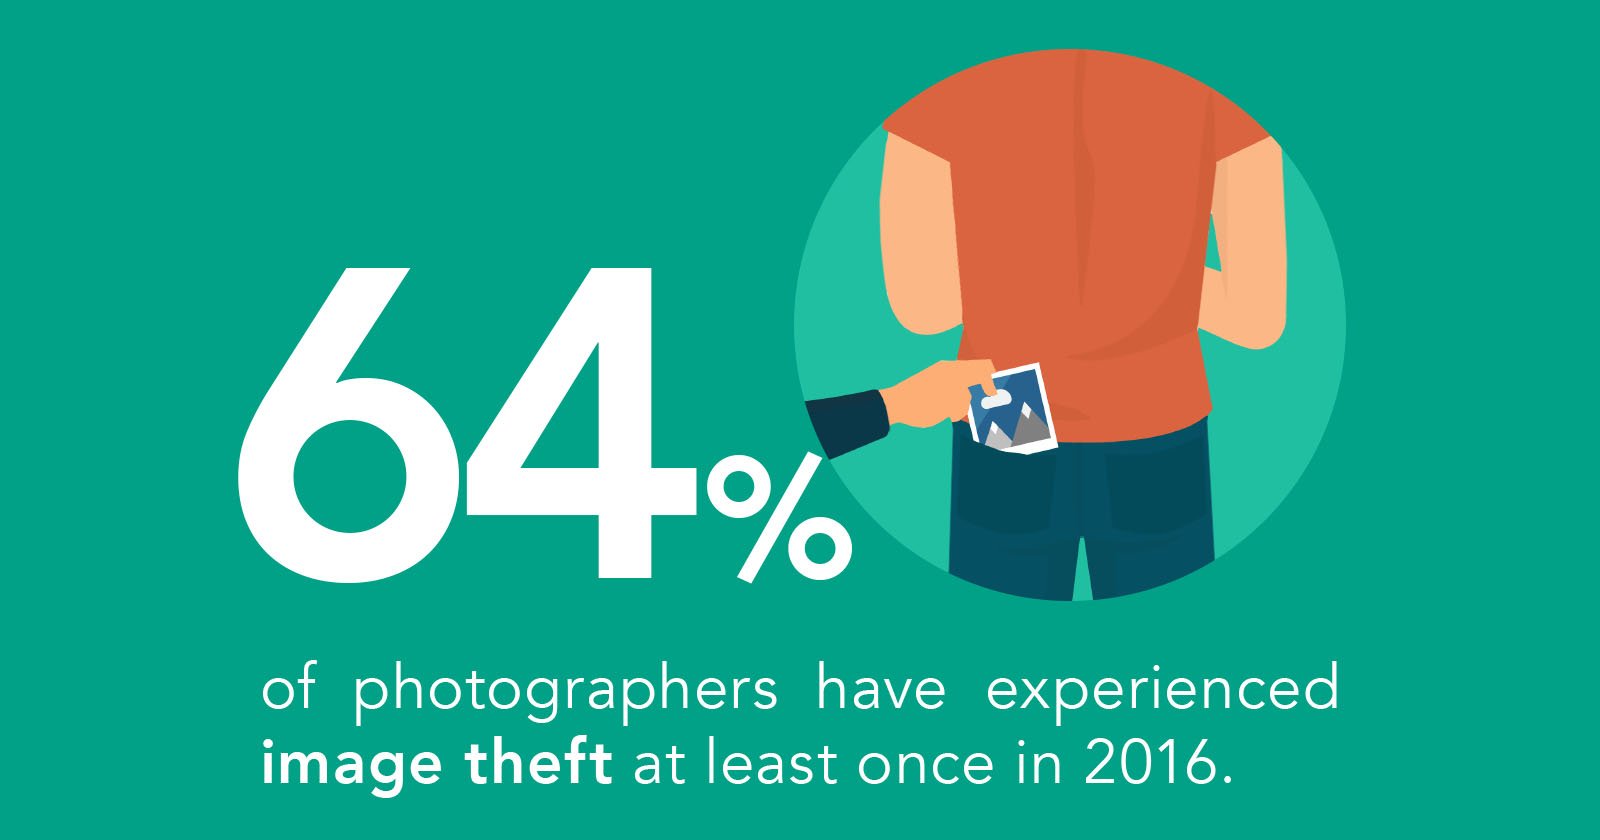 The State of Photo Theft in 2016